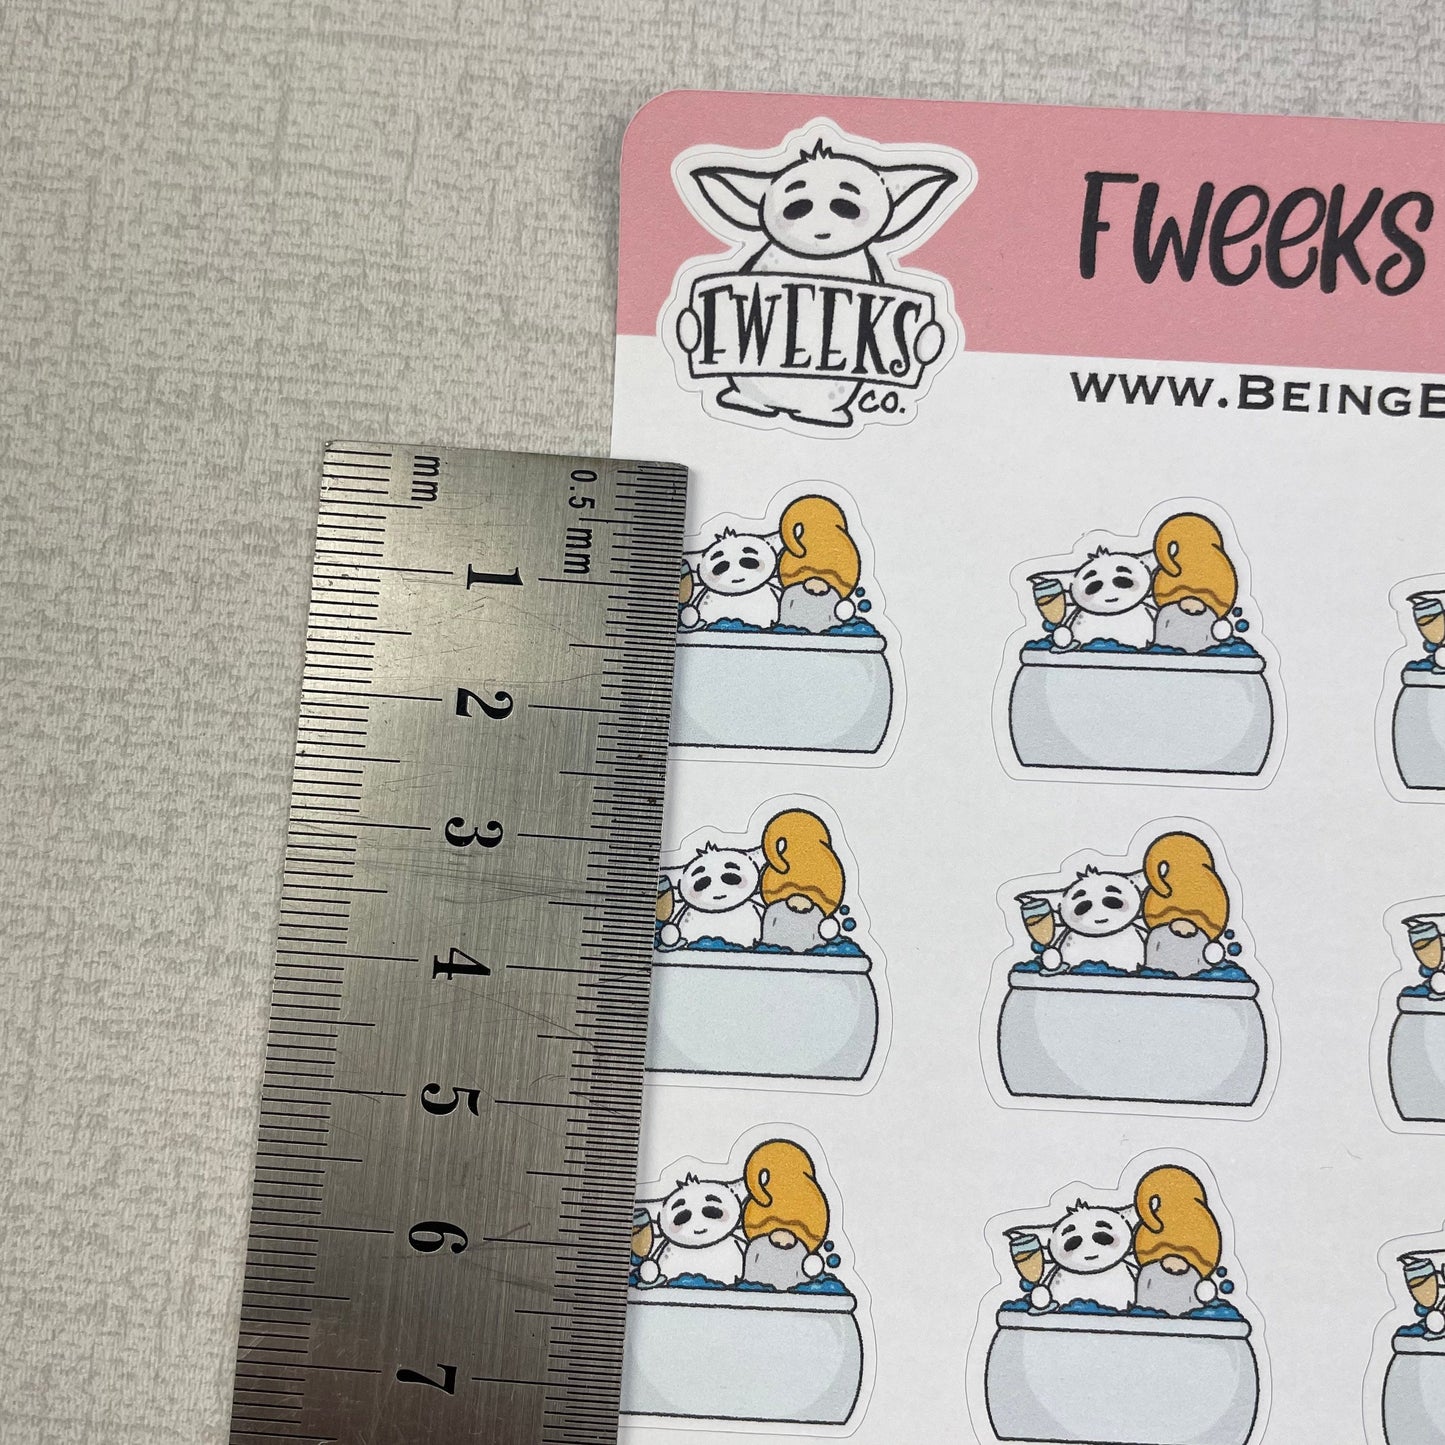 Hot tub / celebration Fweeks Character Planner Stickers / Happy Planner / Hobinich / TN etc (0021)